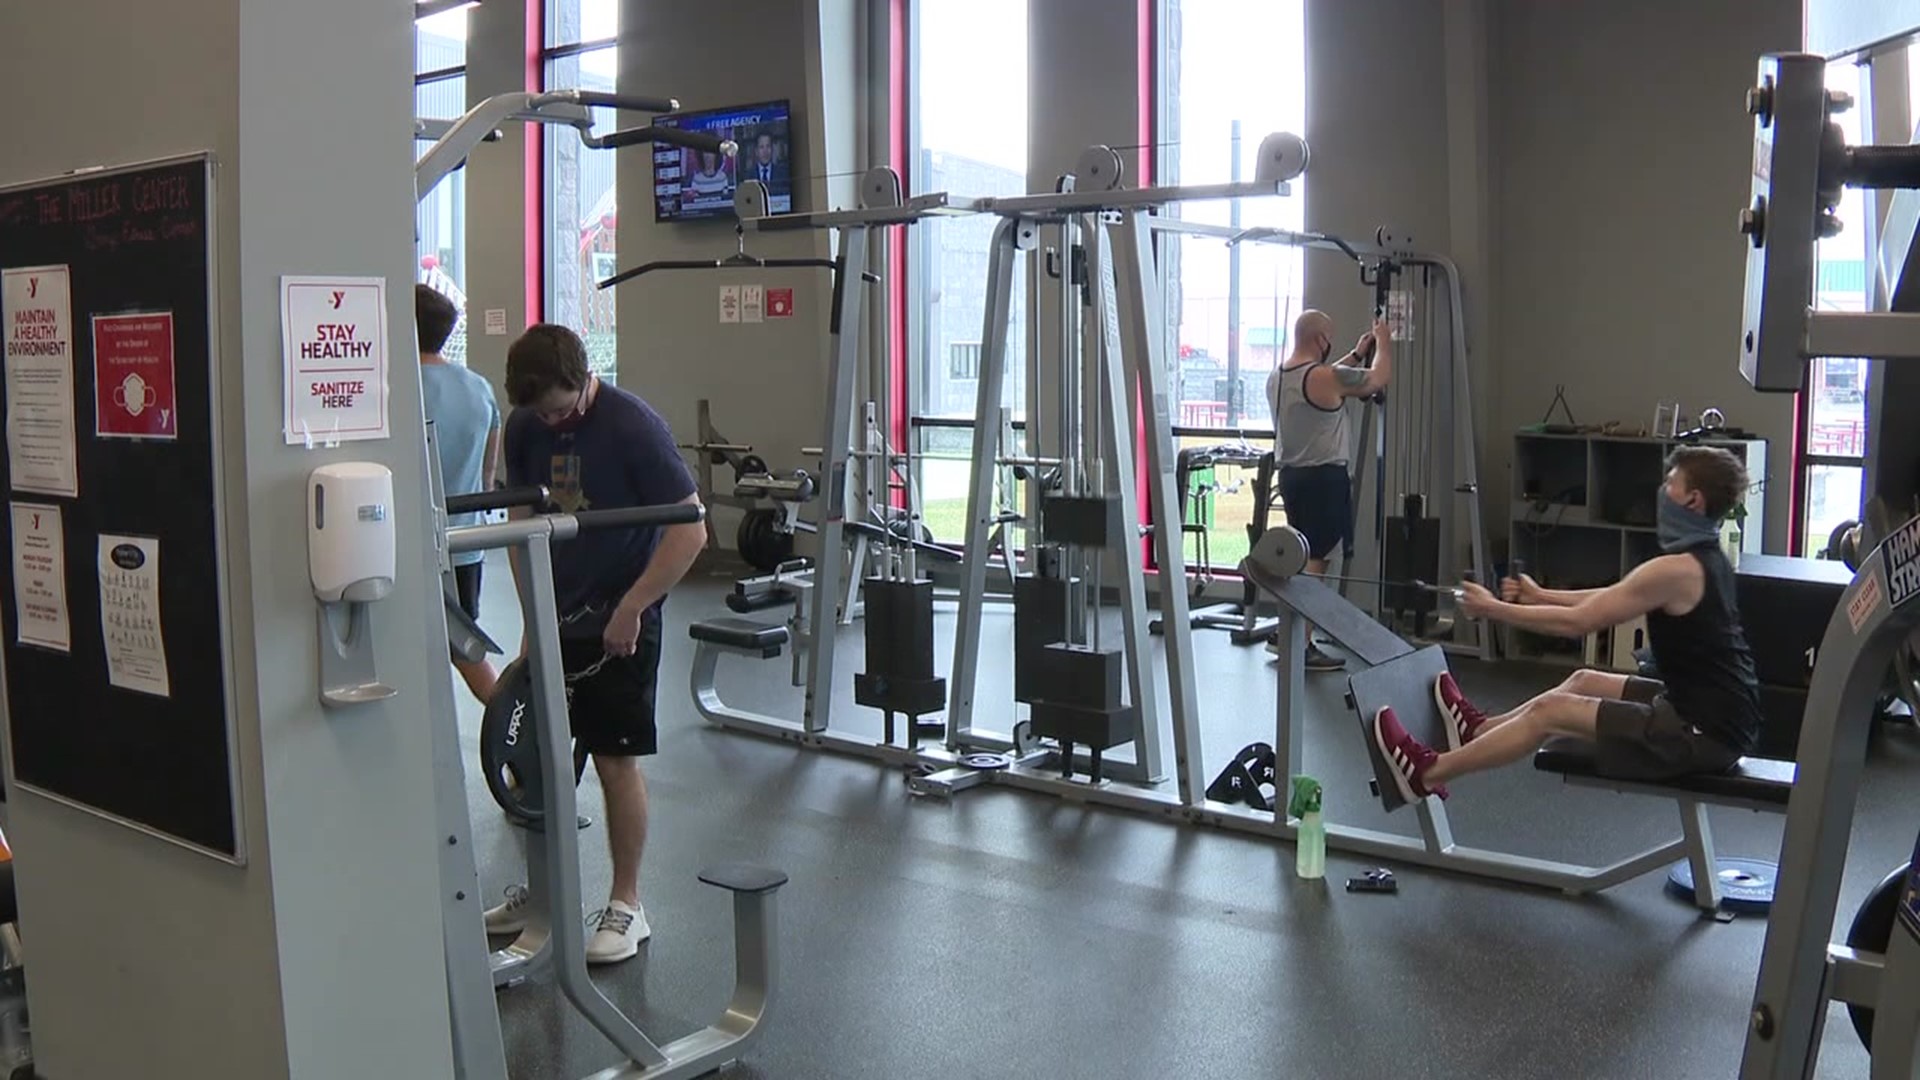 As the vaccinations roll out the restrictions on business loosen, part of that involves fitness centers, which will soon be able to operate at 75 percent capacity.